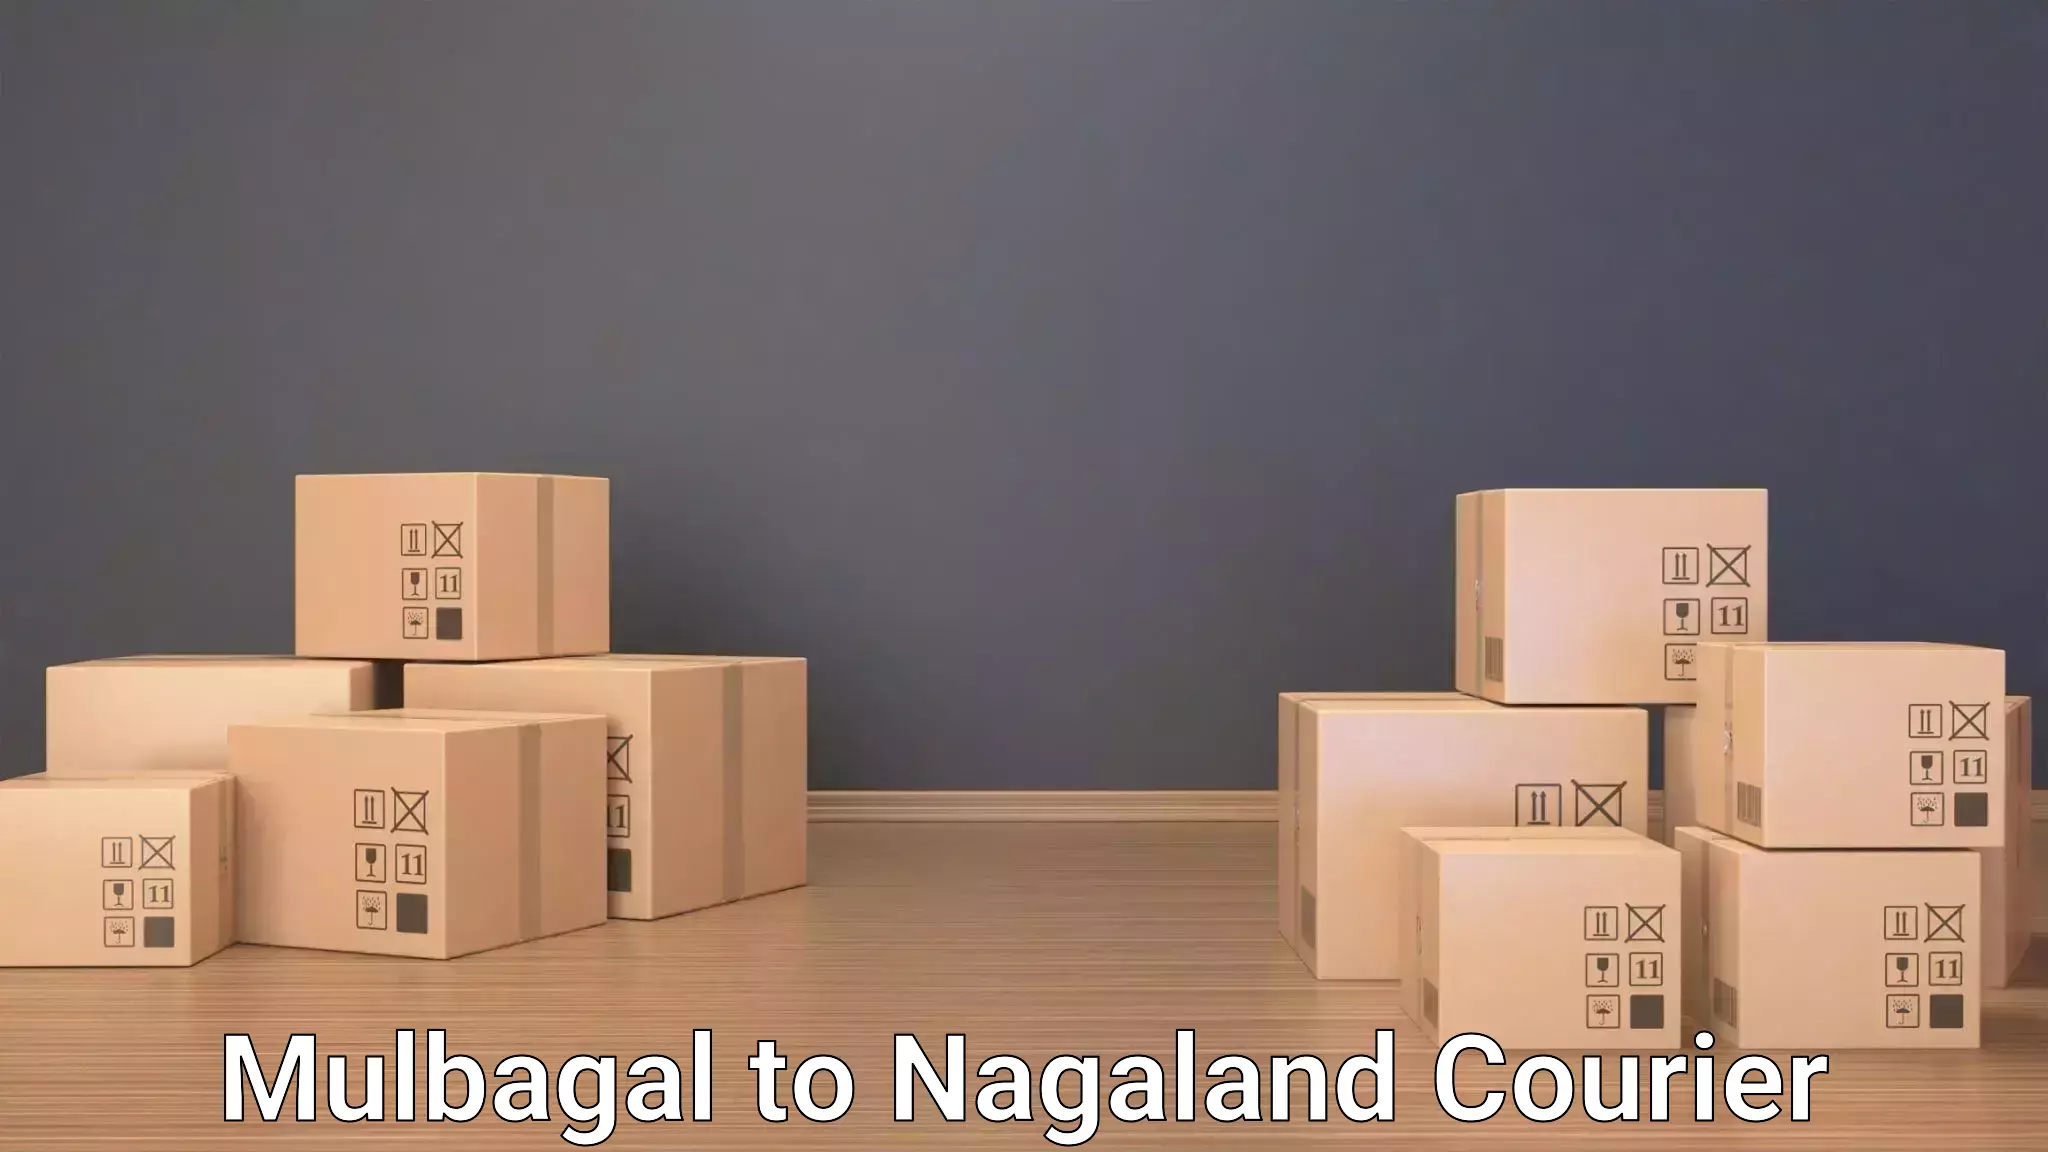 Luggage shipment specialists Mulbagal to Dimapur